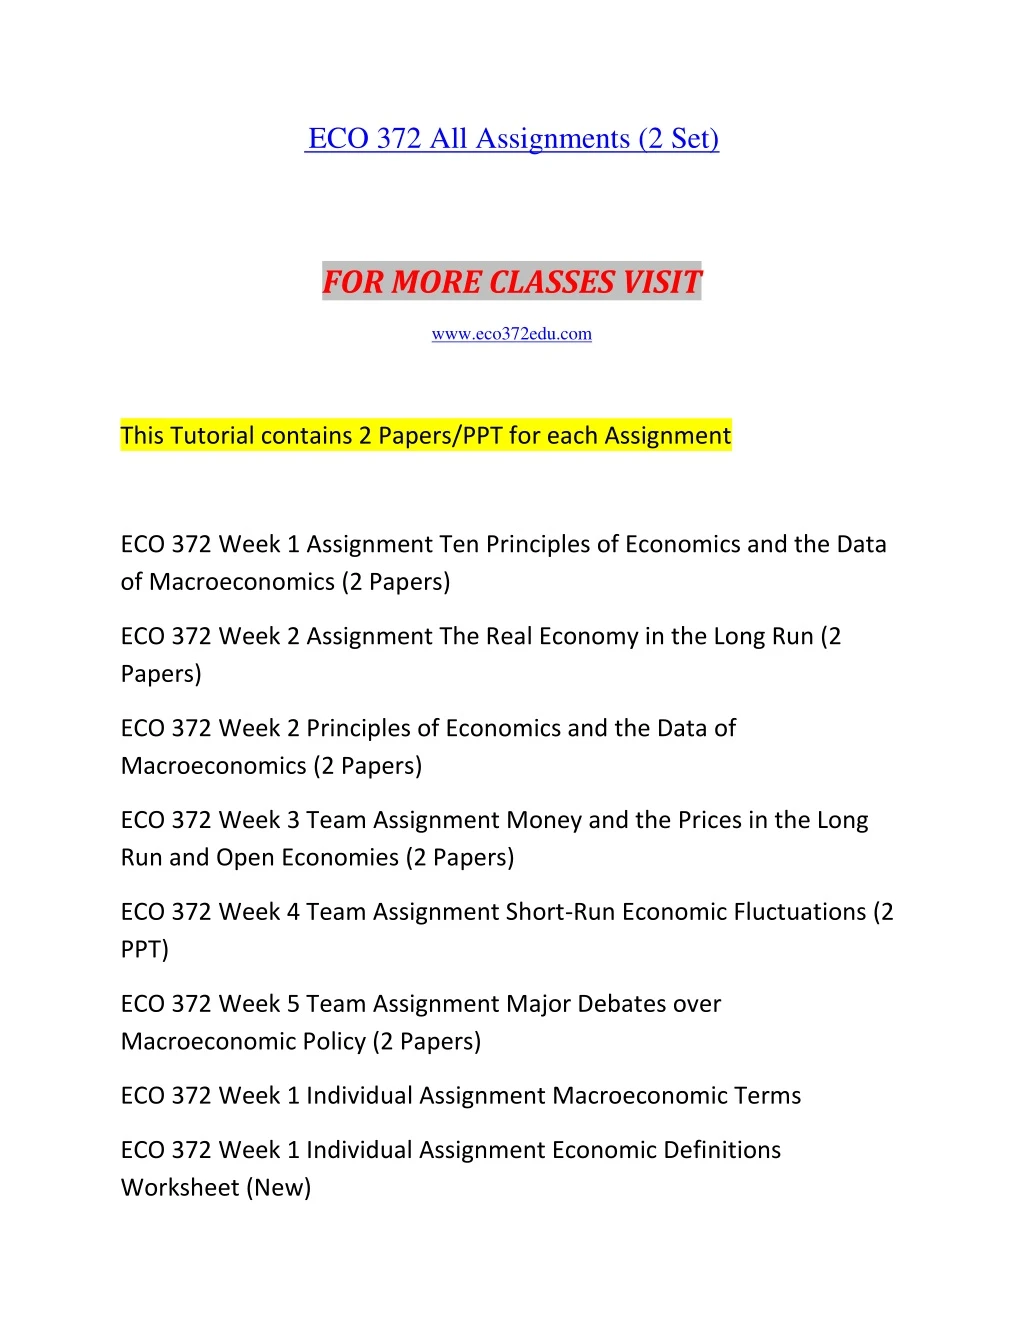 eco 372 all assignments 2 set